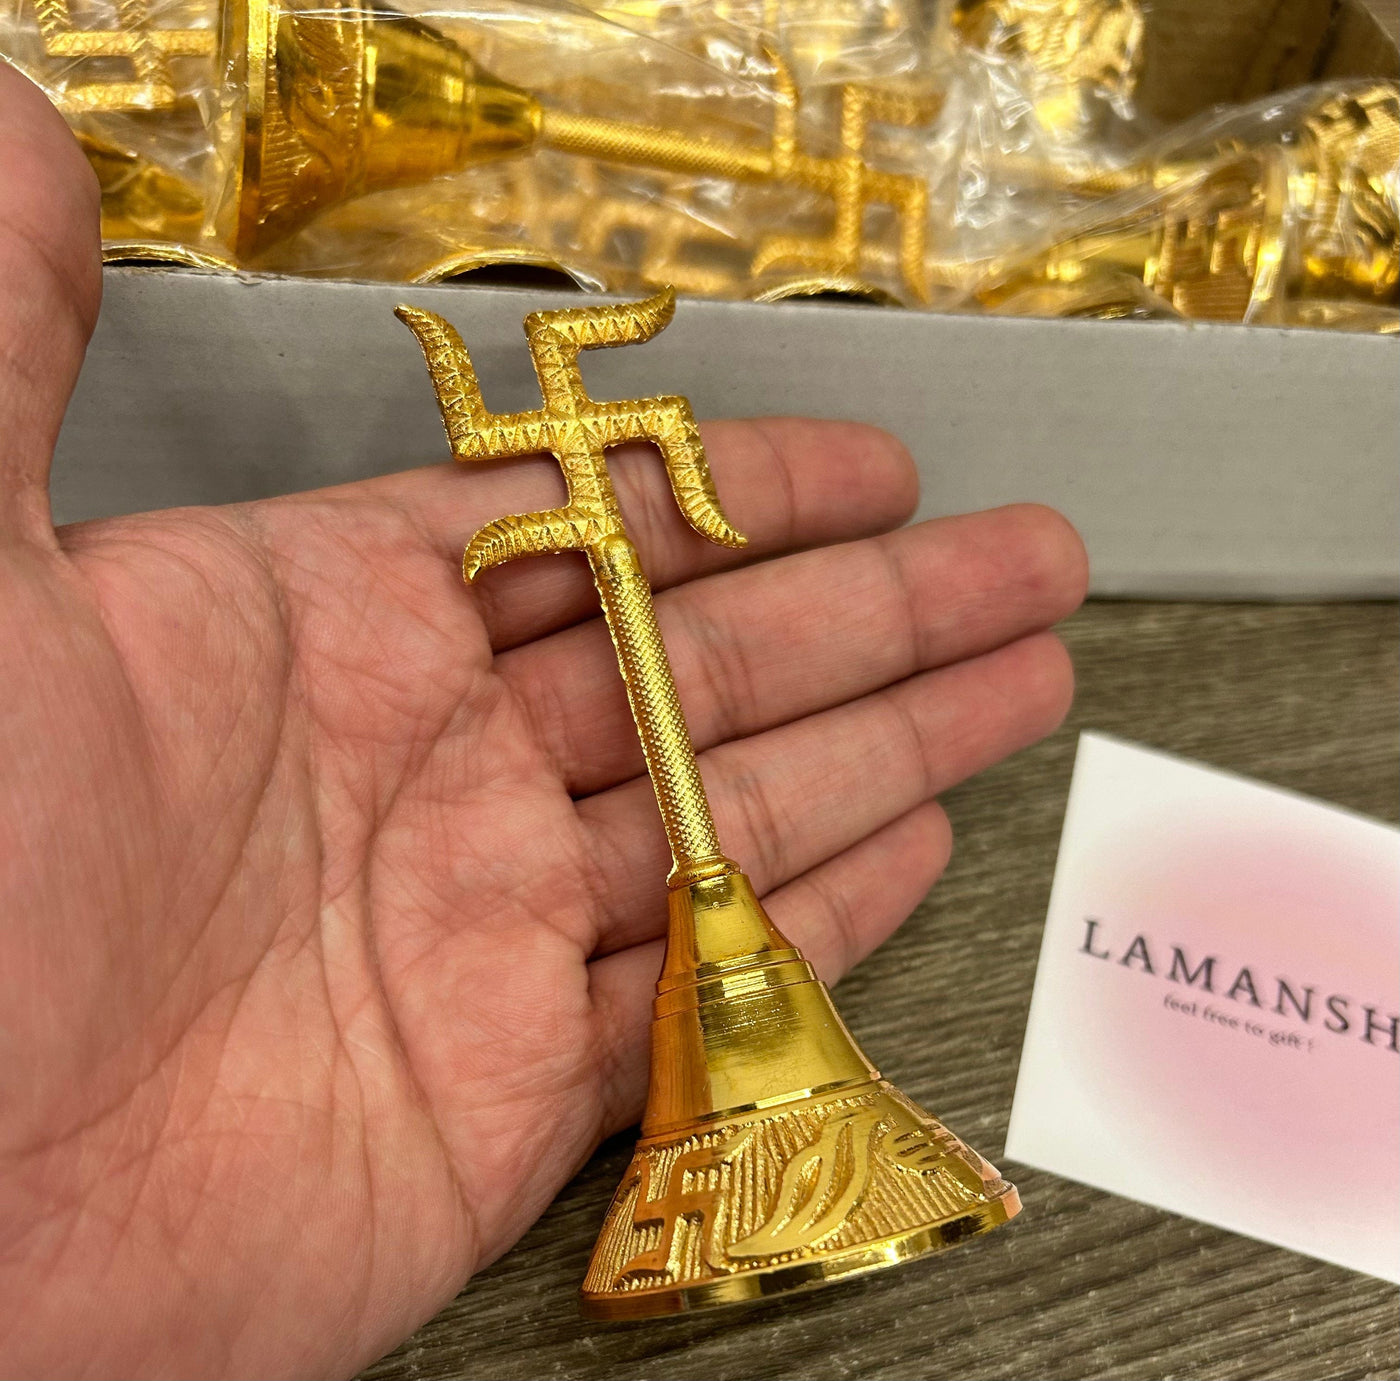 66 Rs each on buying 100+ pcs / WhatsApp at 8619550223 to order 🏷️ bells for couple welcome LAMANSH Golden Swastik Bells 🕉️ Ghanti packed in organza potli bag for Puja Mandir or mangal path ceremony giveaways (video attached)